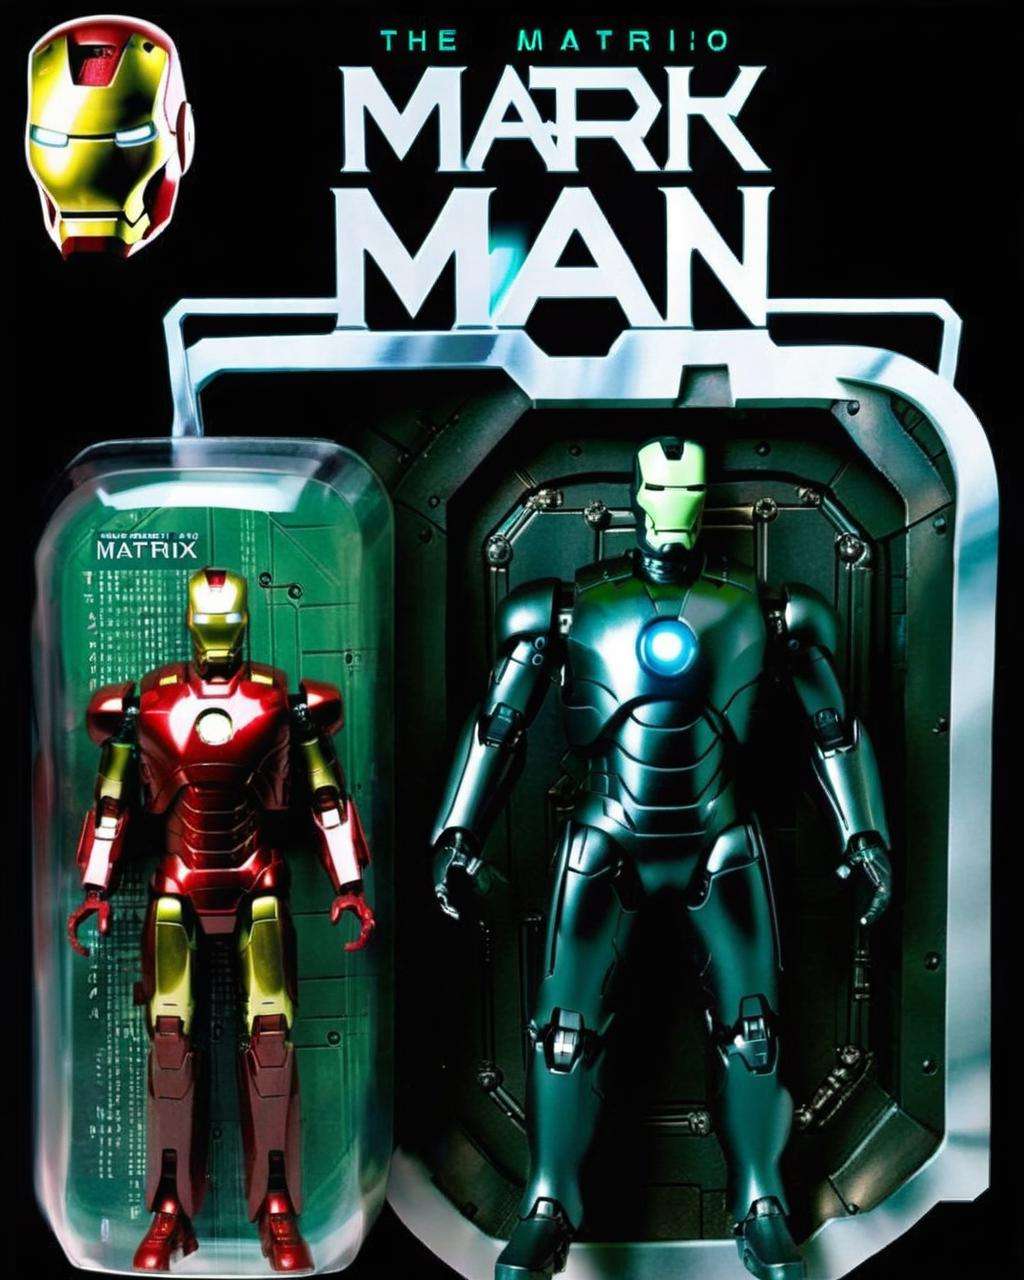 Iron-Matrix Man: Combining Iron Man and Neo from The Matrix, this action figure possesses high-tech armor:0.4 and challenges the digital world:0.4. <lora:Awe_Toys:1.0>